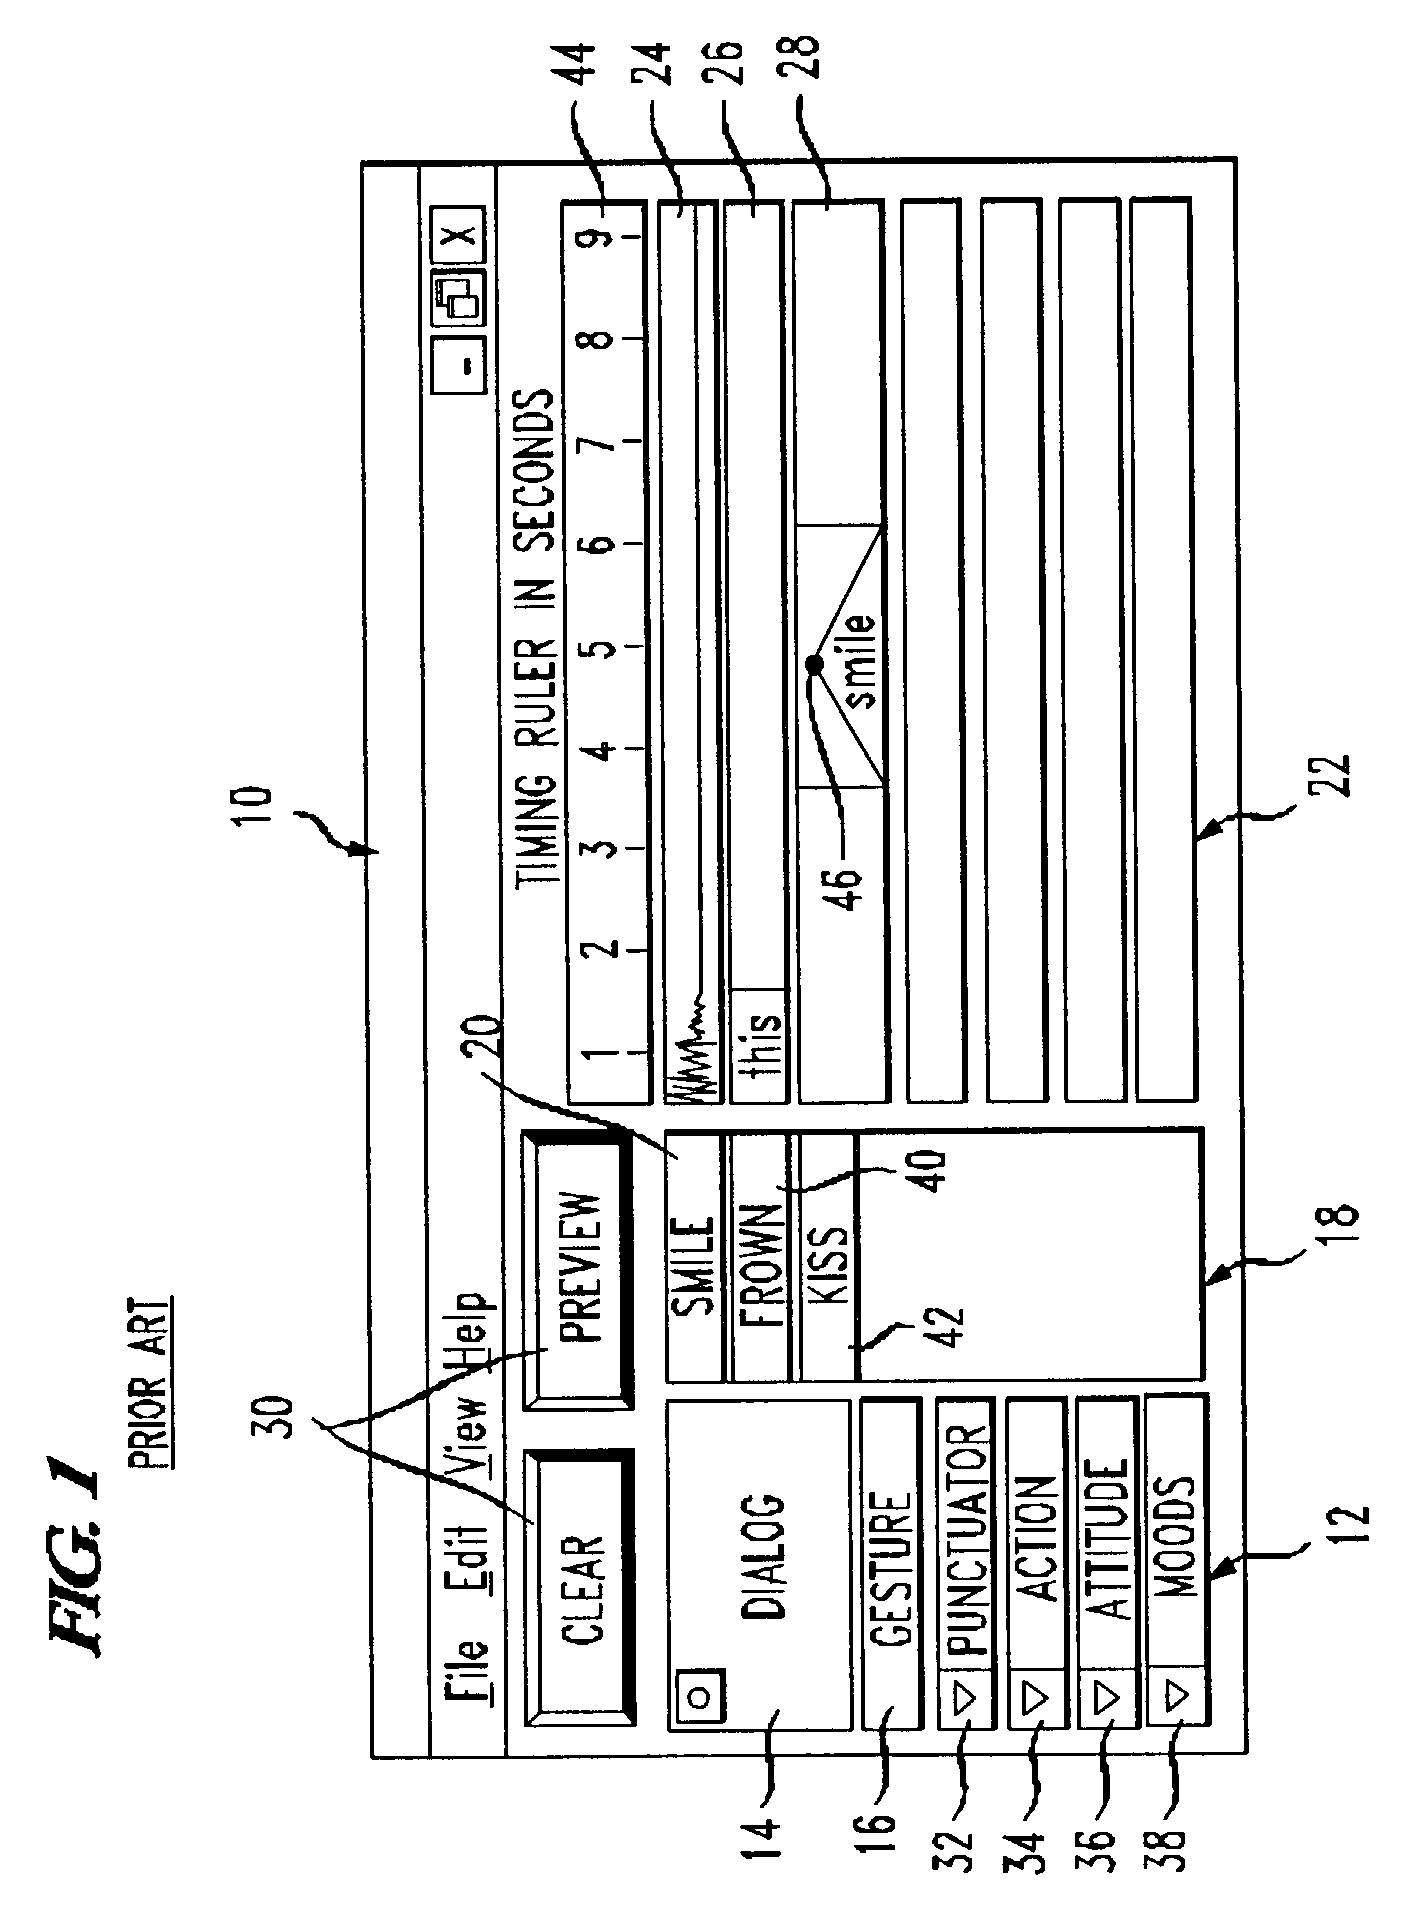 System and method of providing conversational visual prosody for talking heads